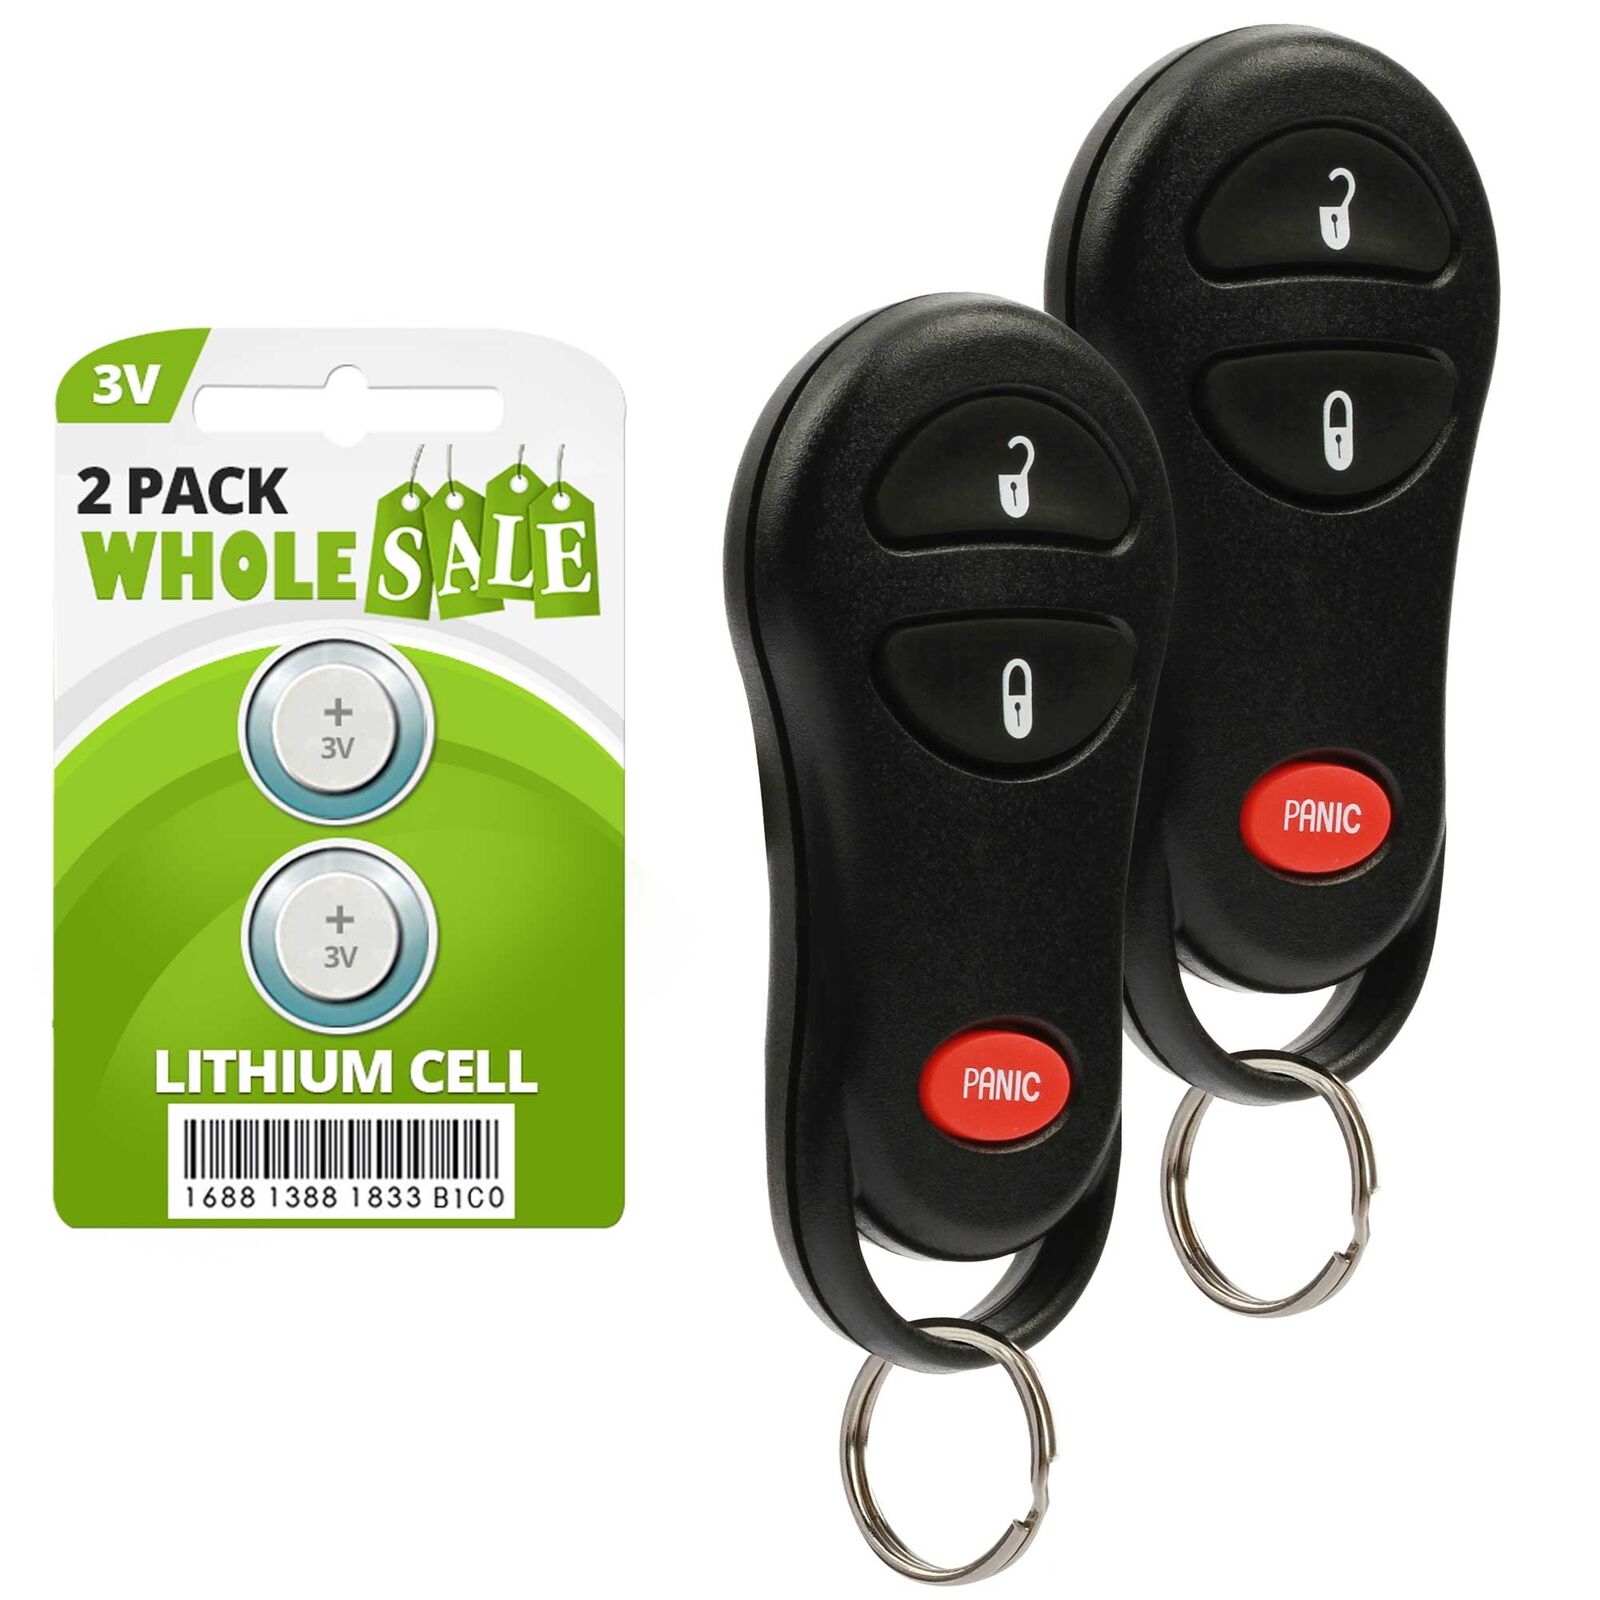 2 Replacement For 2001 2002 2003 2004 2005 Chrysler PT Cruiser Key Fob Remote